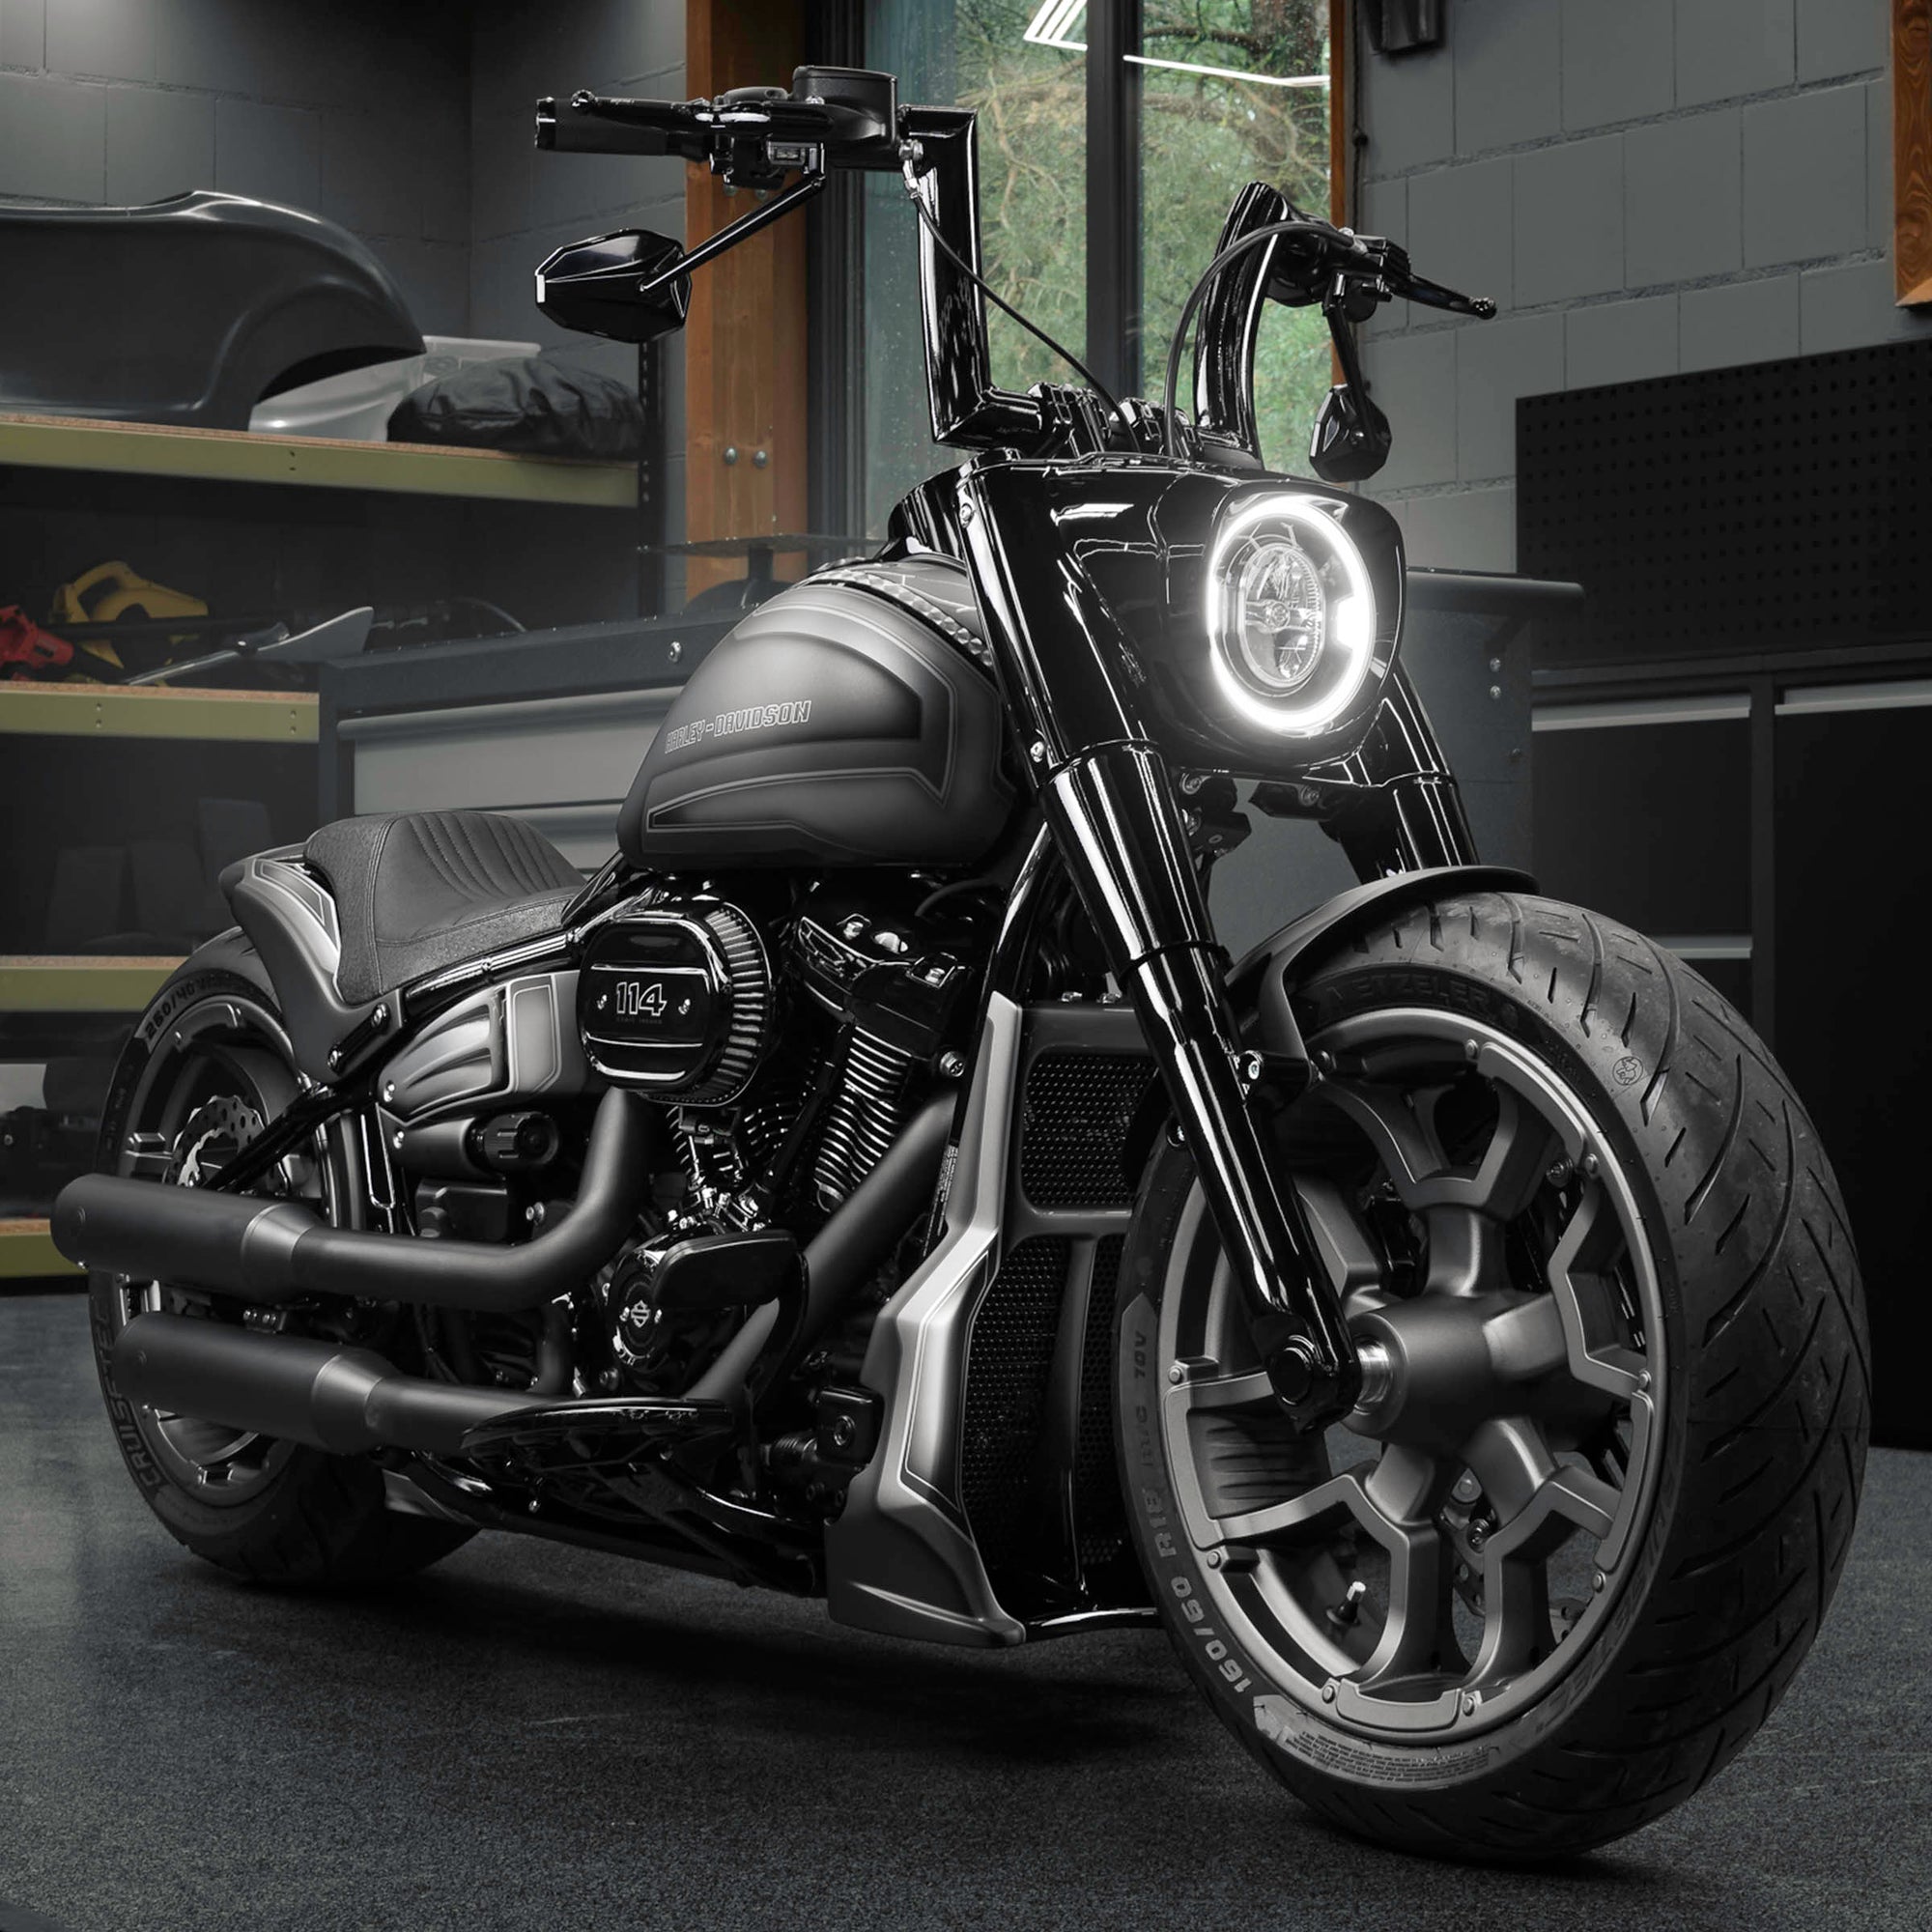 Zoomed Harley Davidson Fat Boy motorcycle with Killer Custom parts from the front in a modern bike shop